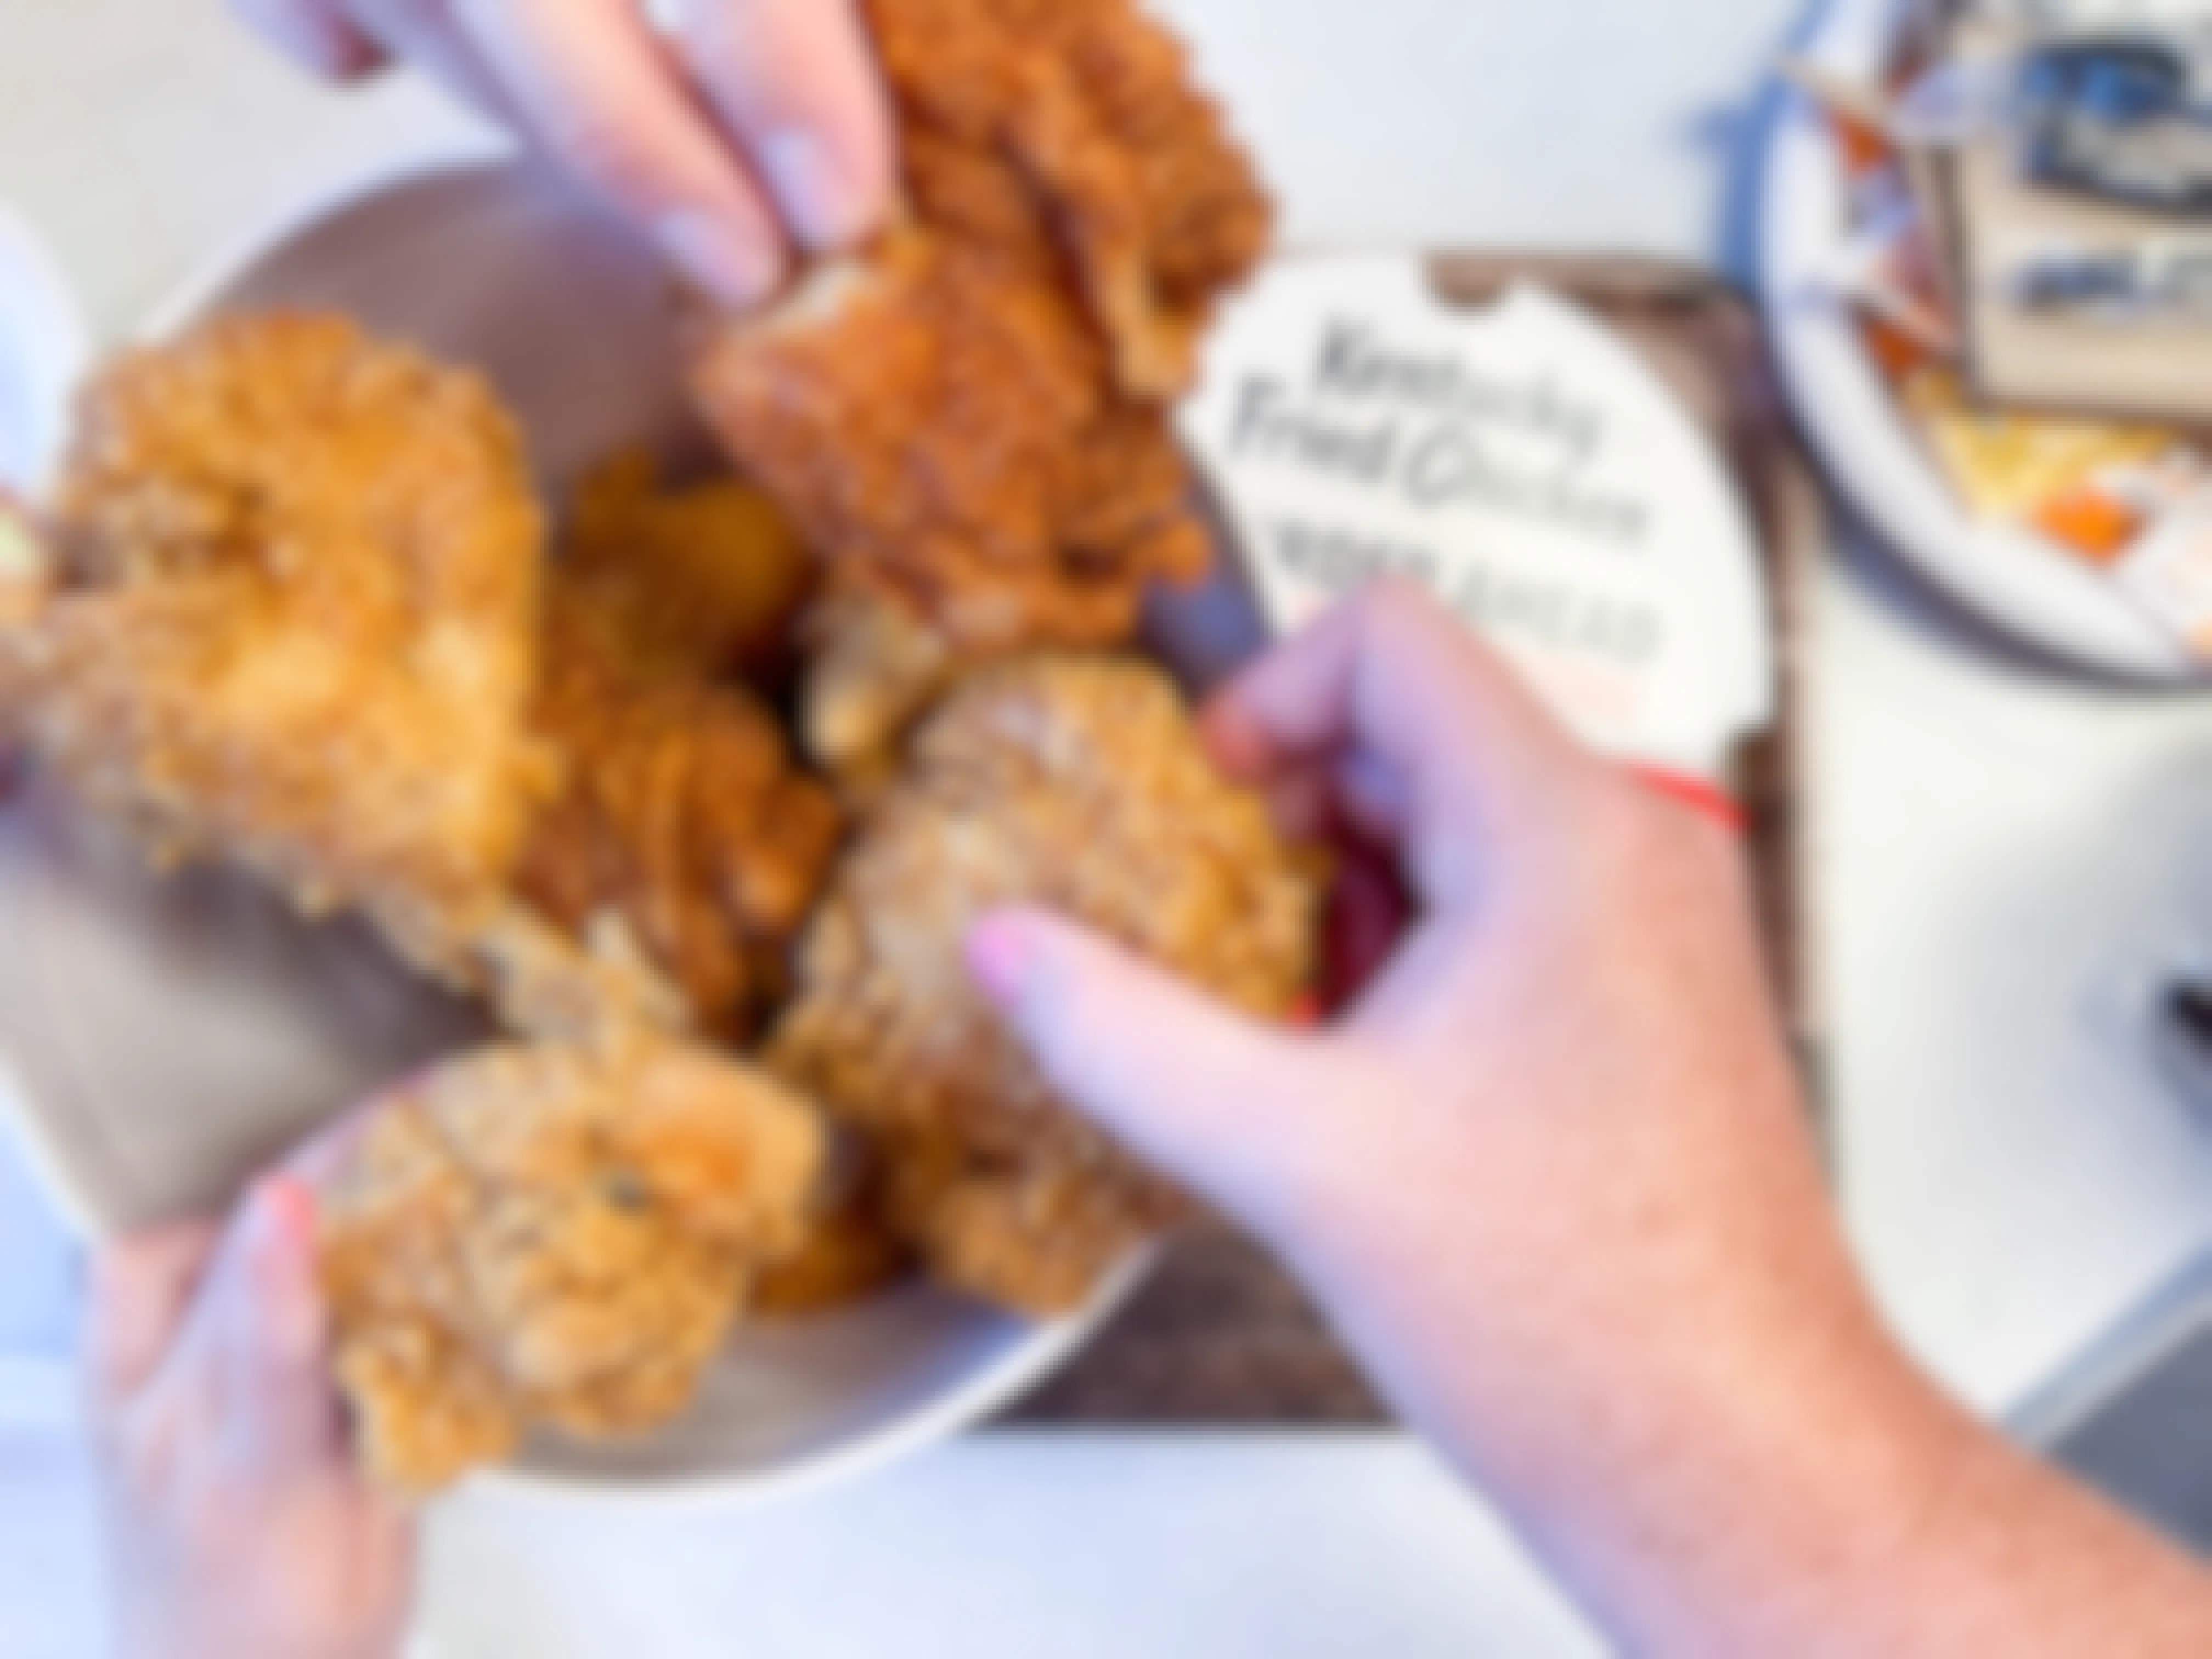 open bucket of kfc chicken on table with family hands pulling out multiple pieces of chicken